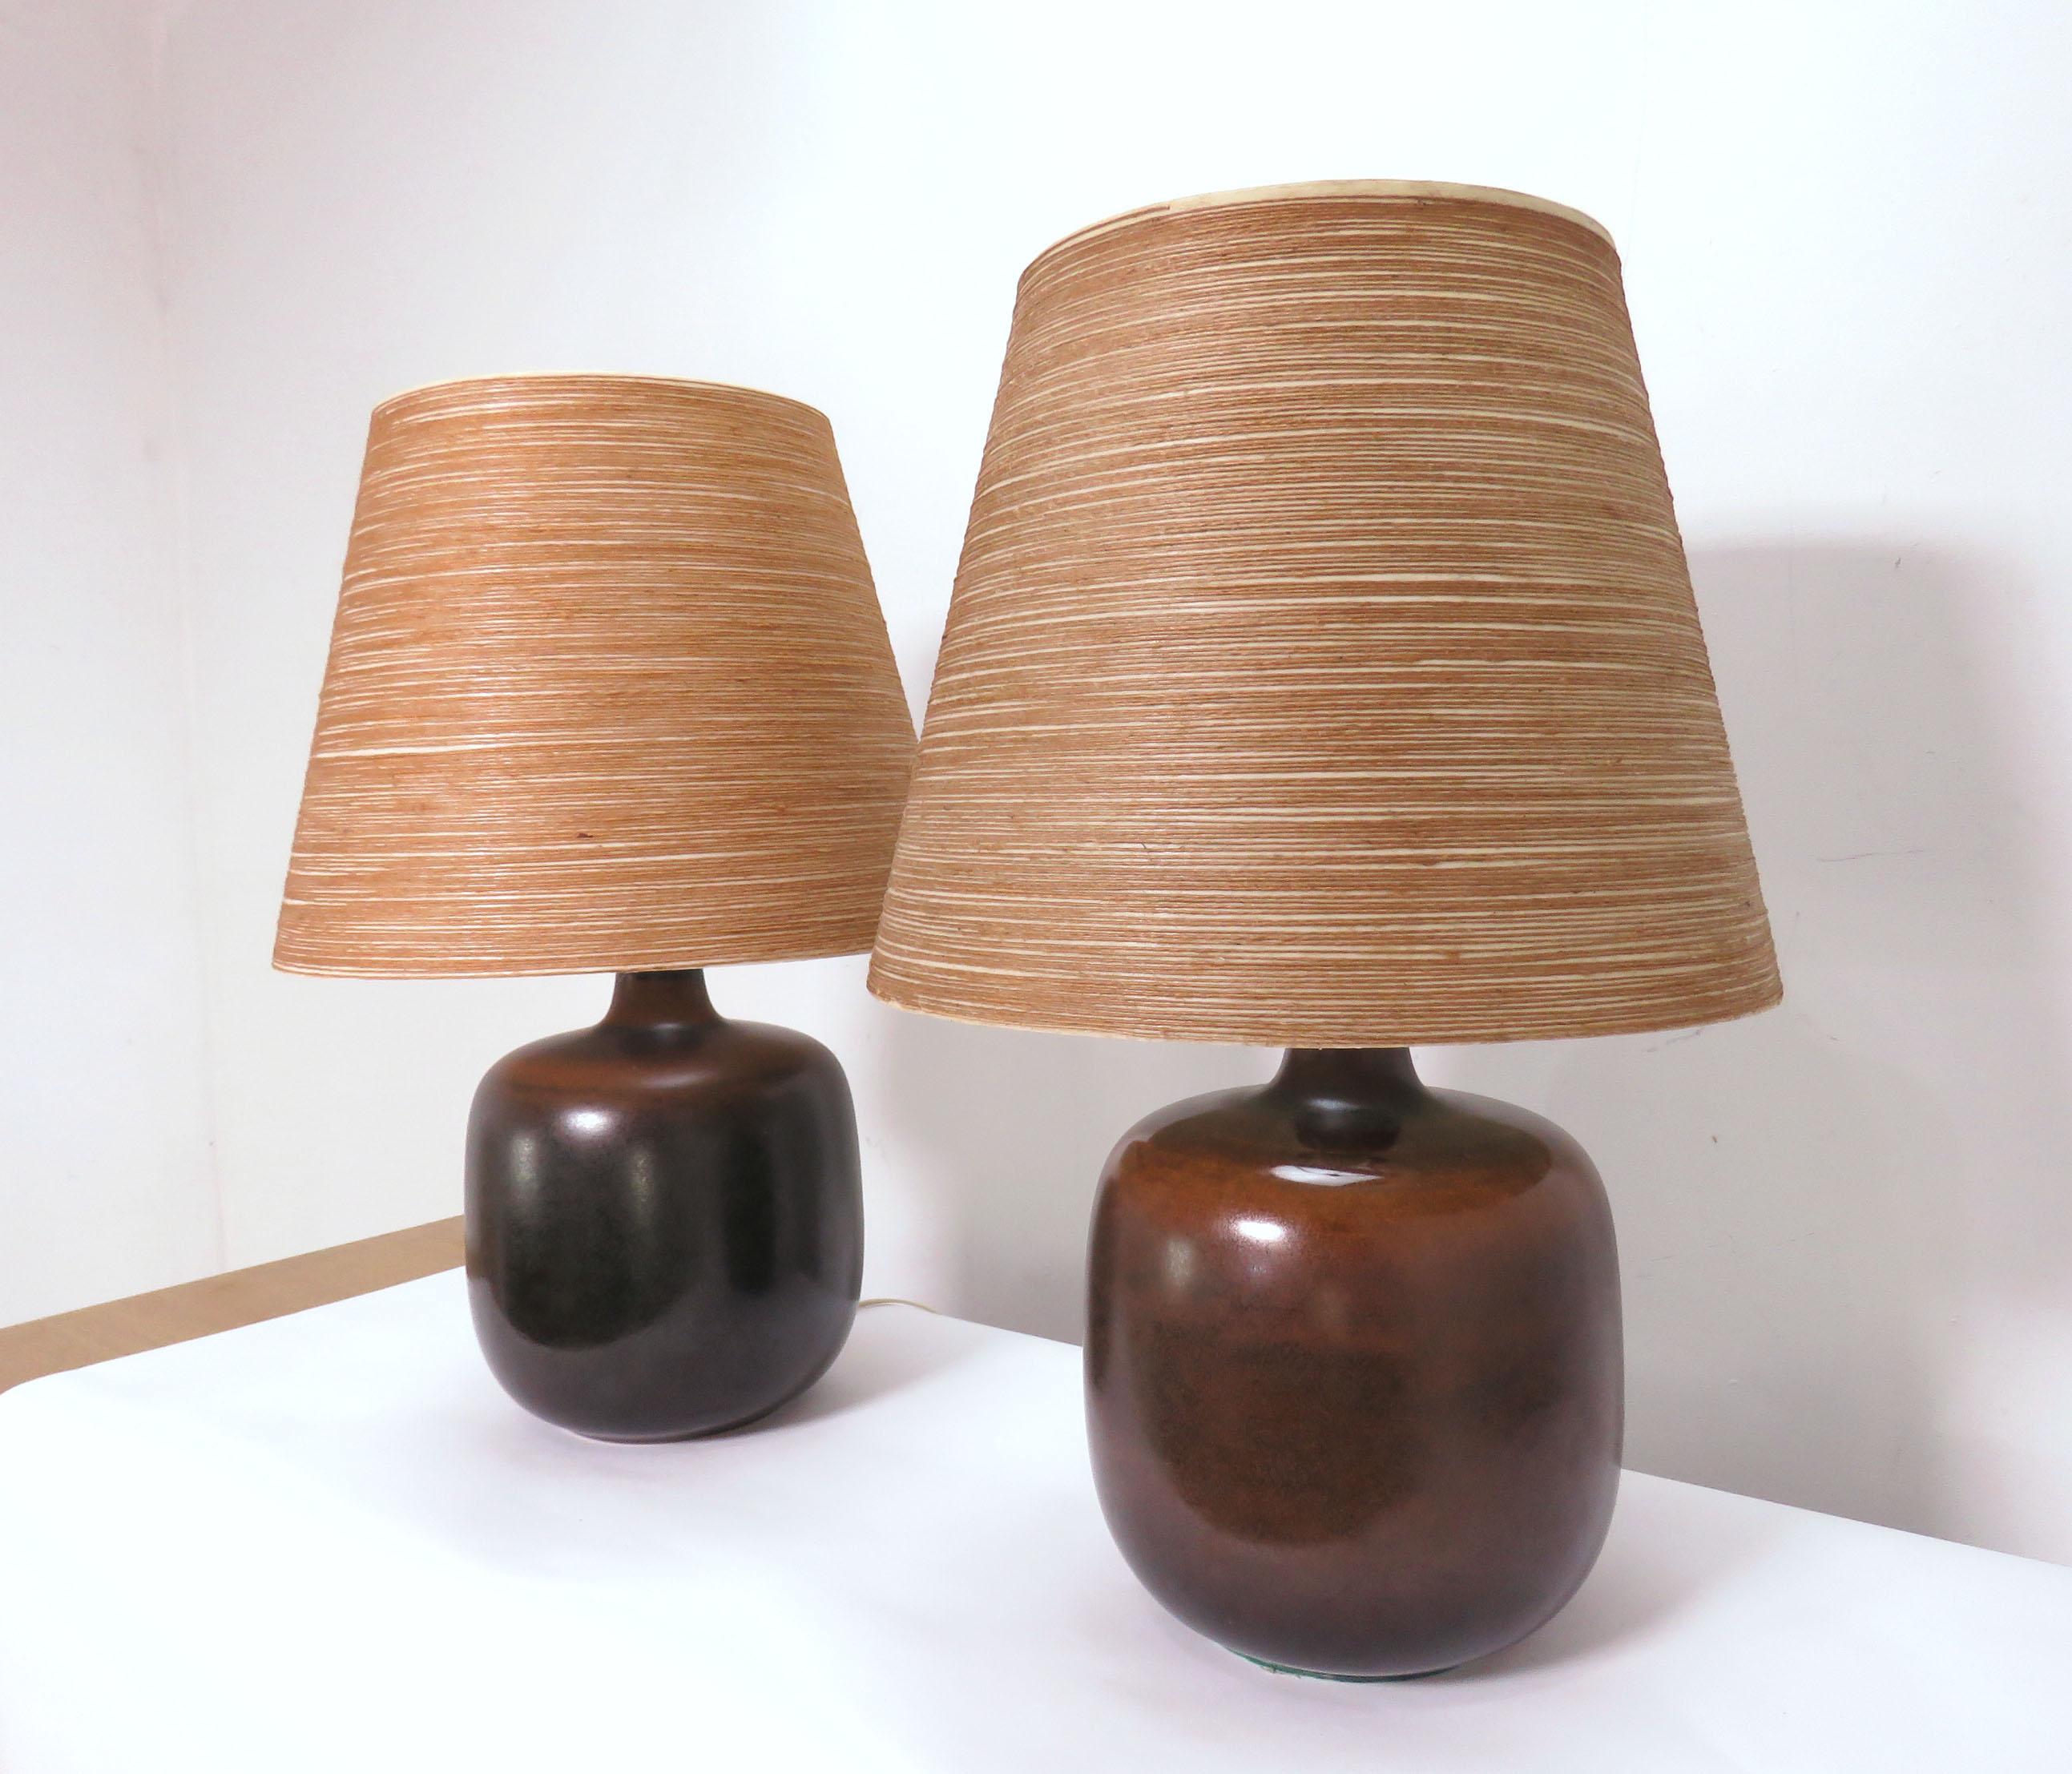 Pair of ceramic table lamps with a hare's fur glaze by Lotte & Gunnar Bostlund, with original spun fiberglass shades, circa 1970s.

Bases measure 10